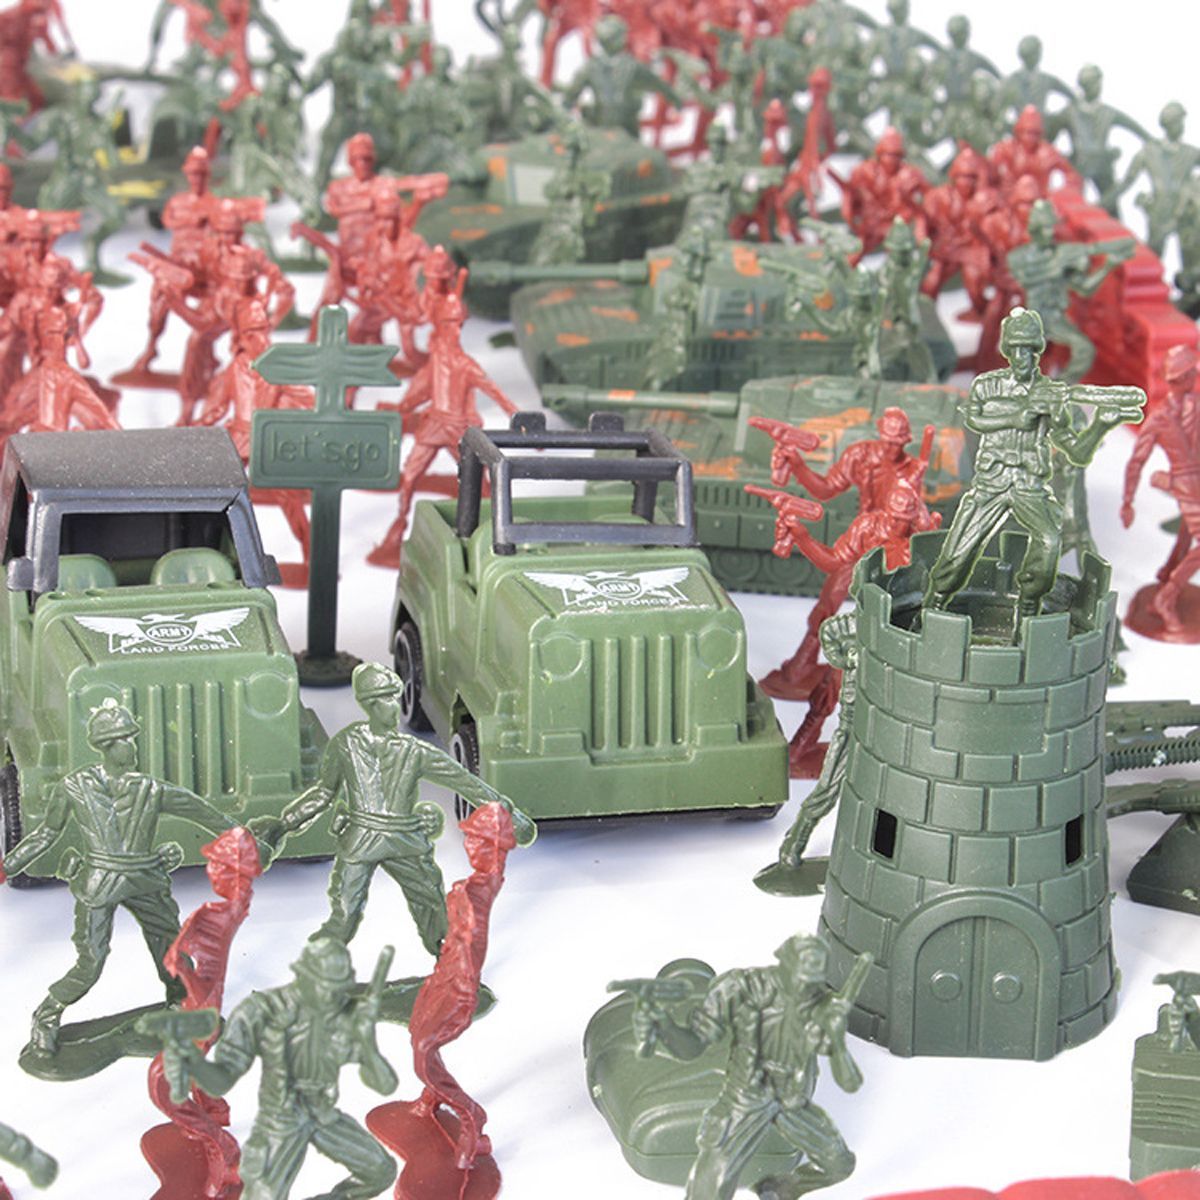 307pcs-Soldiers-Grenade-T-ank-Aircraft-Rocket-Army-Men-Sand-Scene-Model-Kids-Toys-1472906